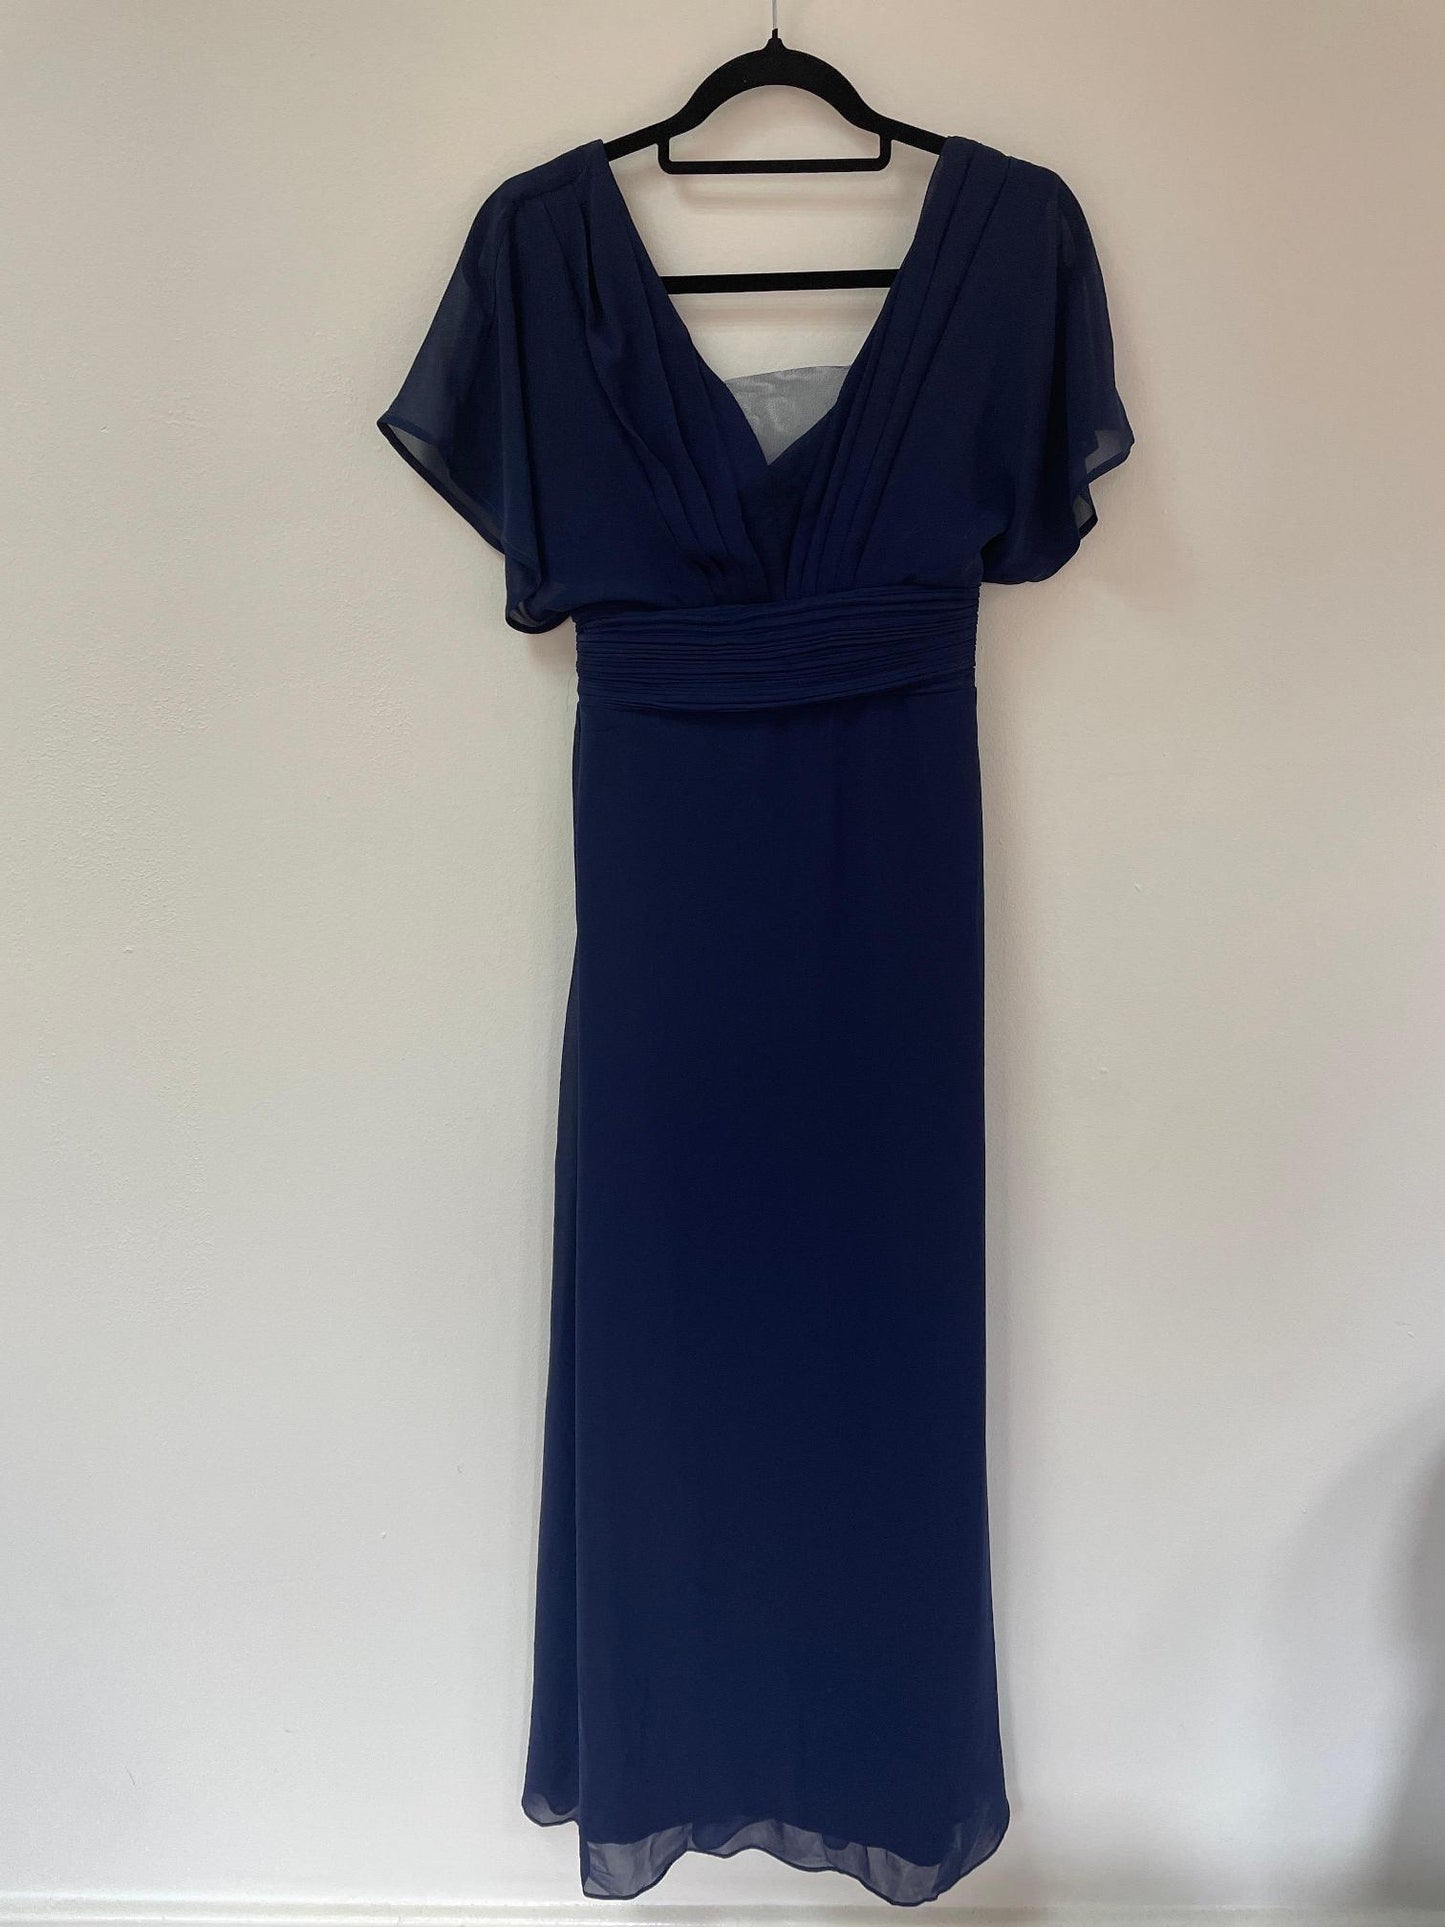 Navy pleated maxi dress, Ever Pretty, Size 12 - Damaged Item Sale